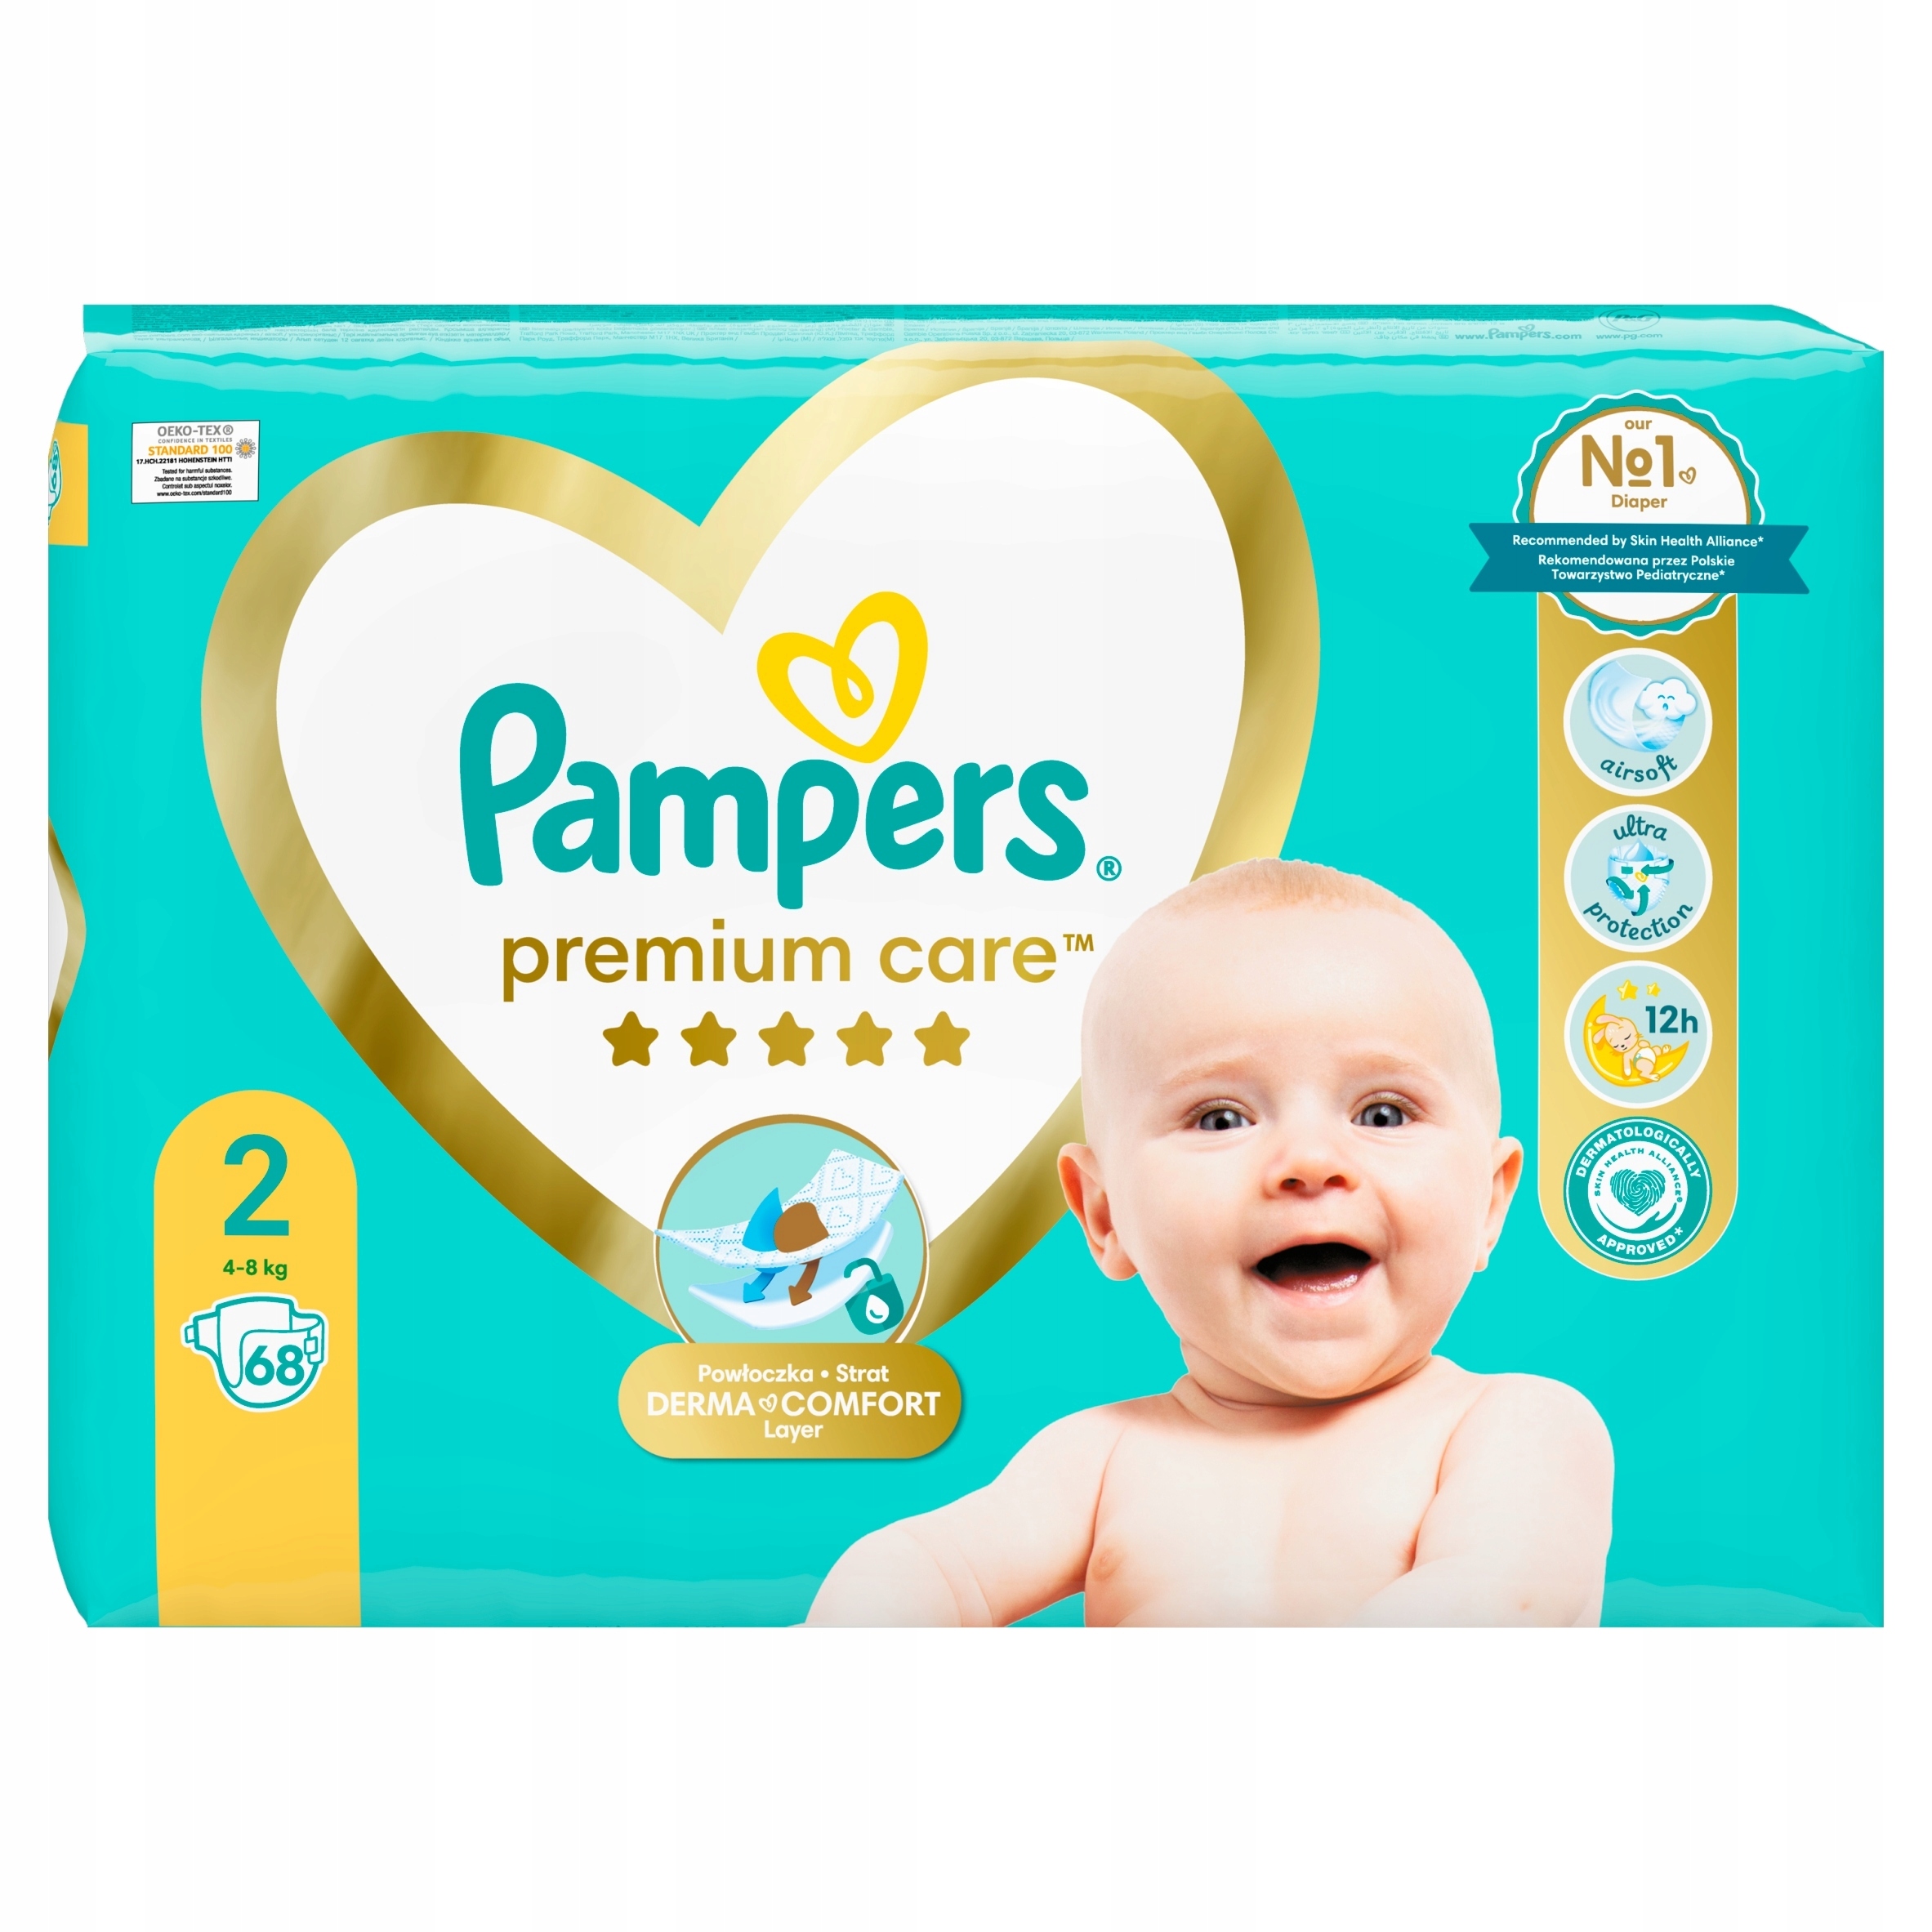 pampers size 7 active fit